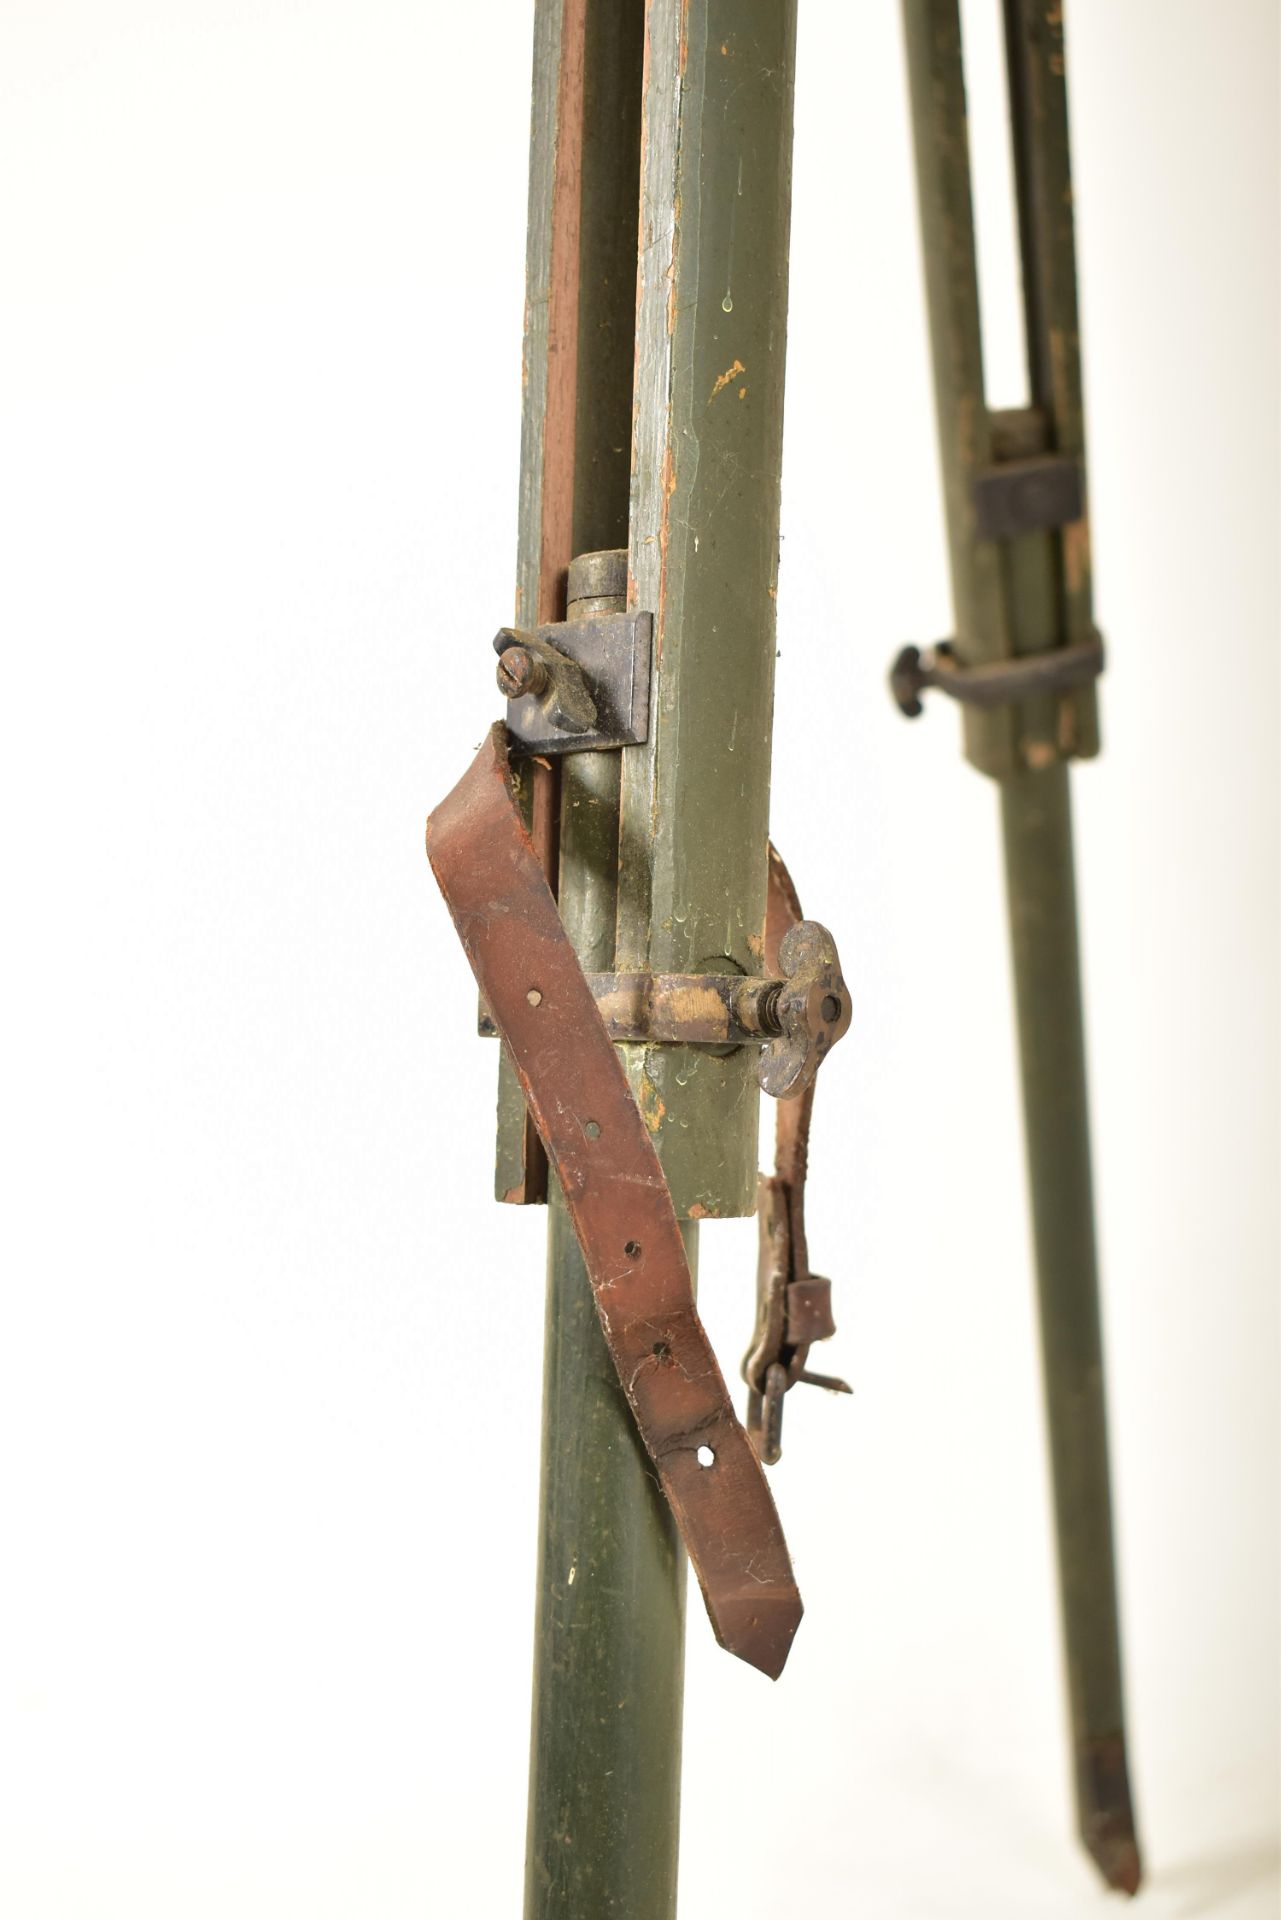 MID 20TH CENTURY WOOD & METAL MILITARY SURVEY TRIPOD STAND - Image 3 of 6